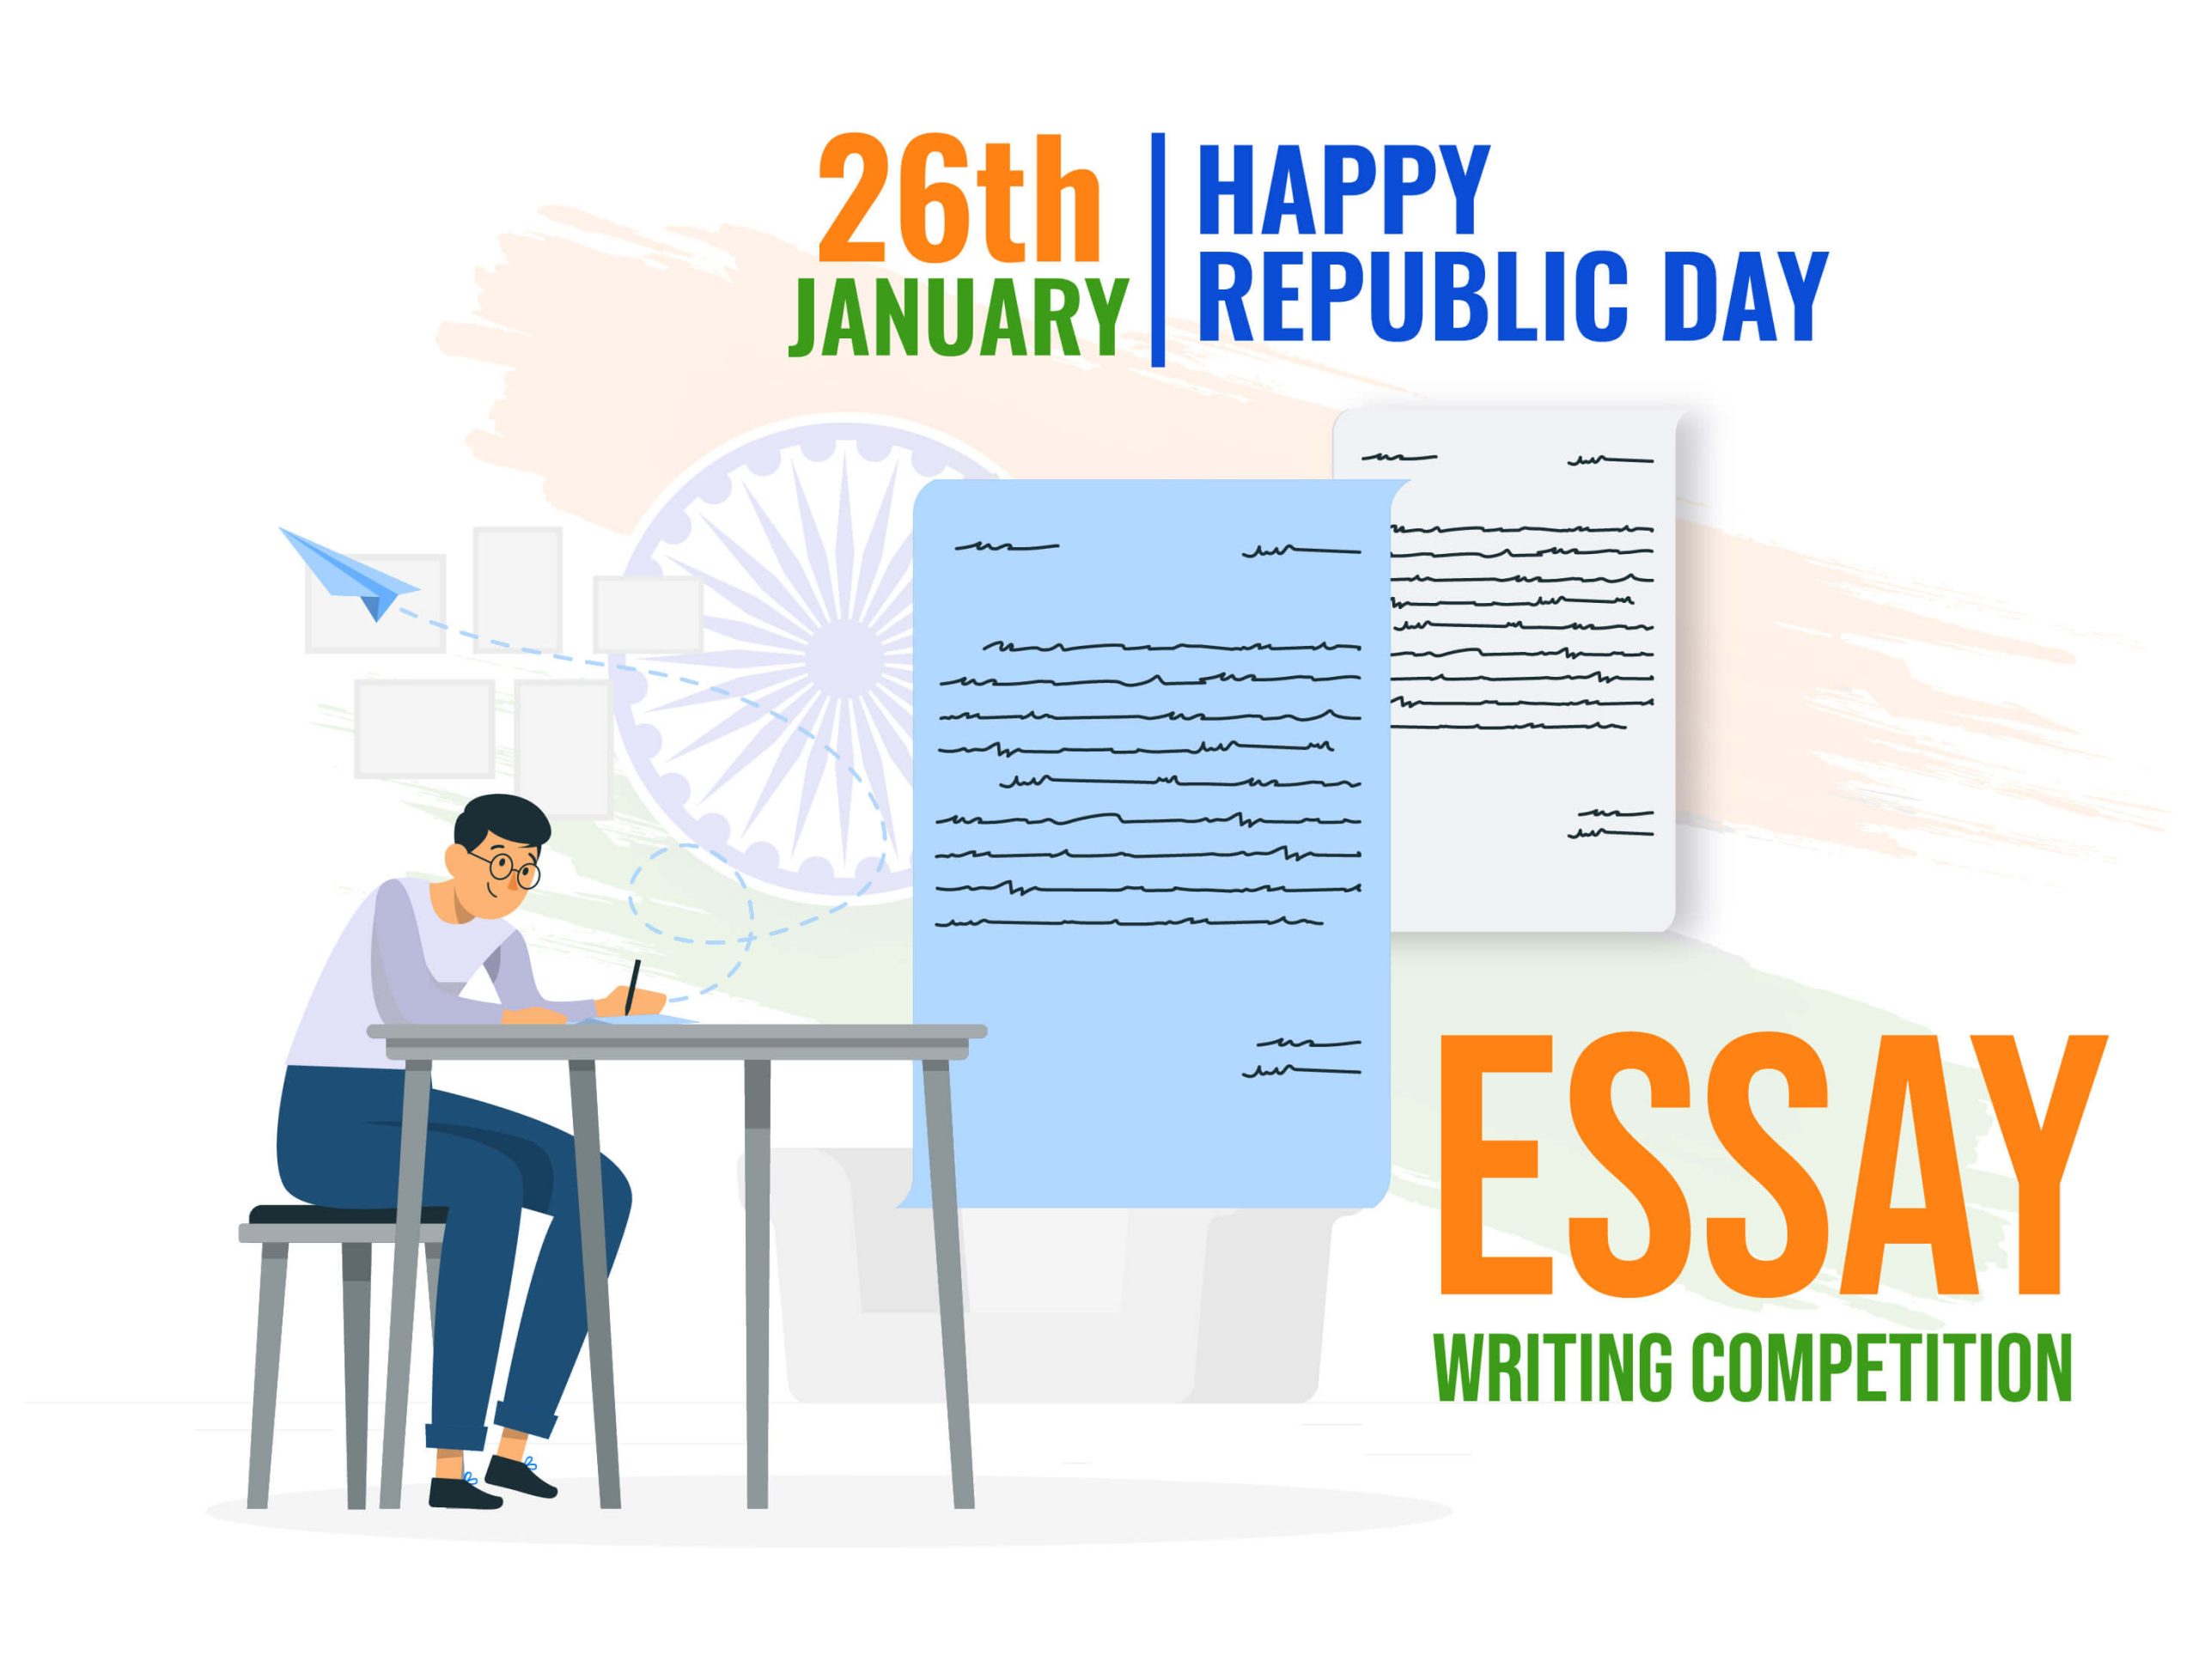 Essay writing competition